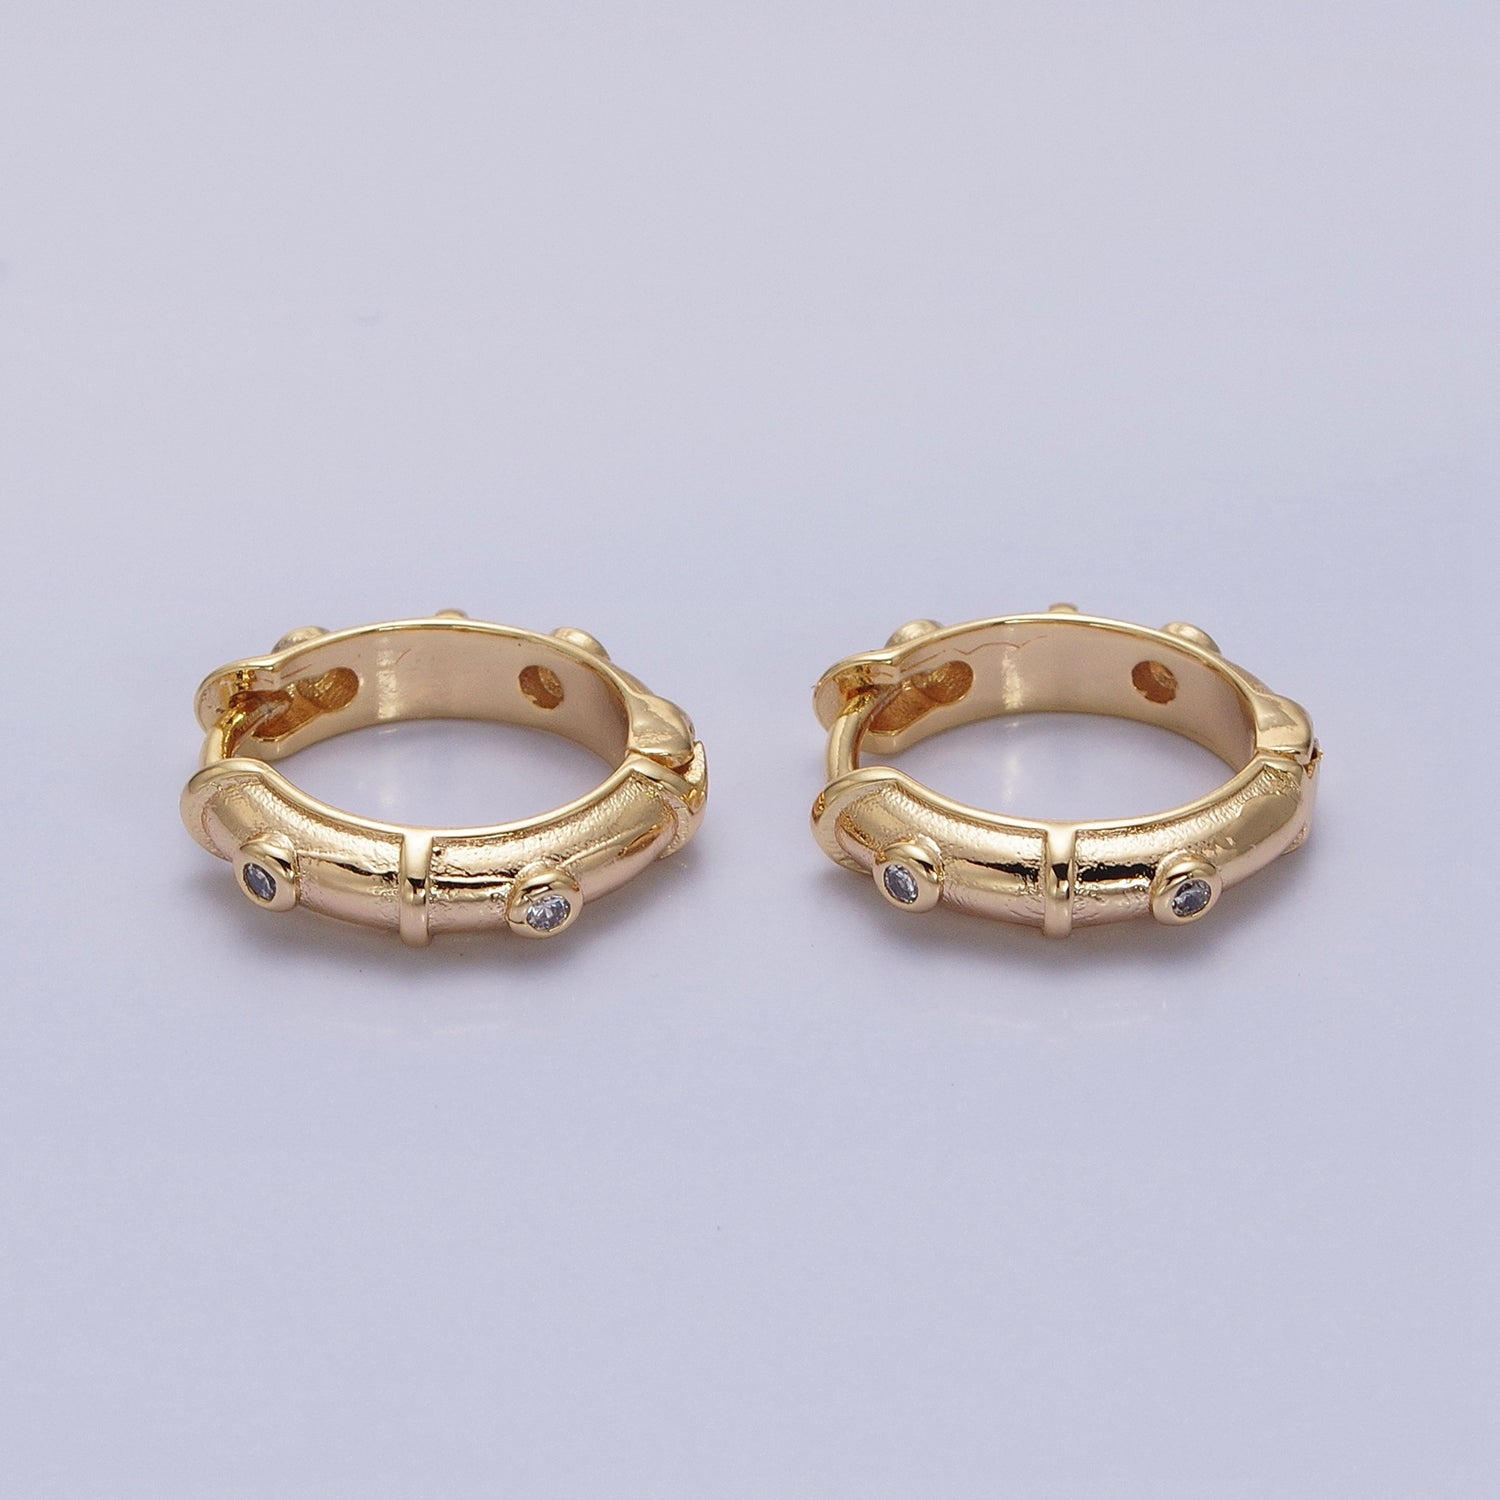 16K Gold Filled CZ Dotted 15mm Huggie Hoop Earrings in Gold & Silver | AB1555 AB1556